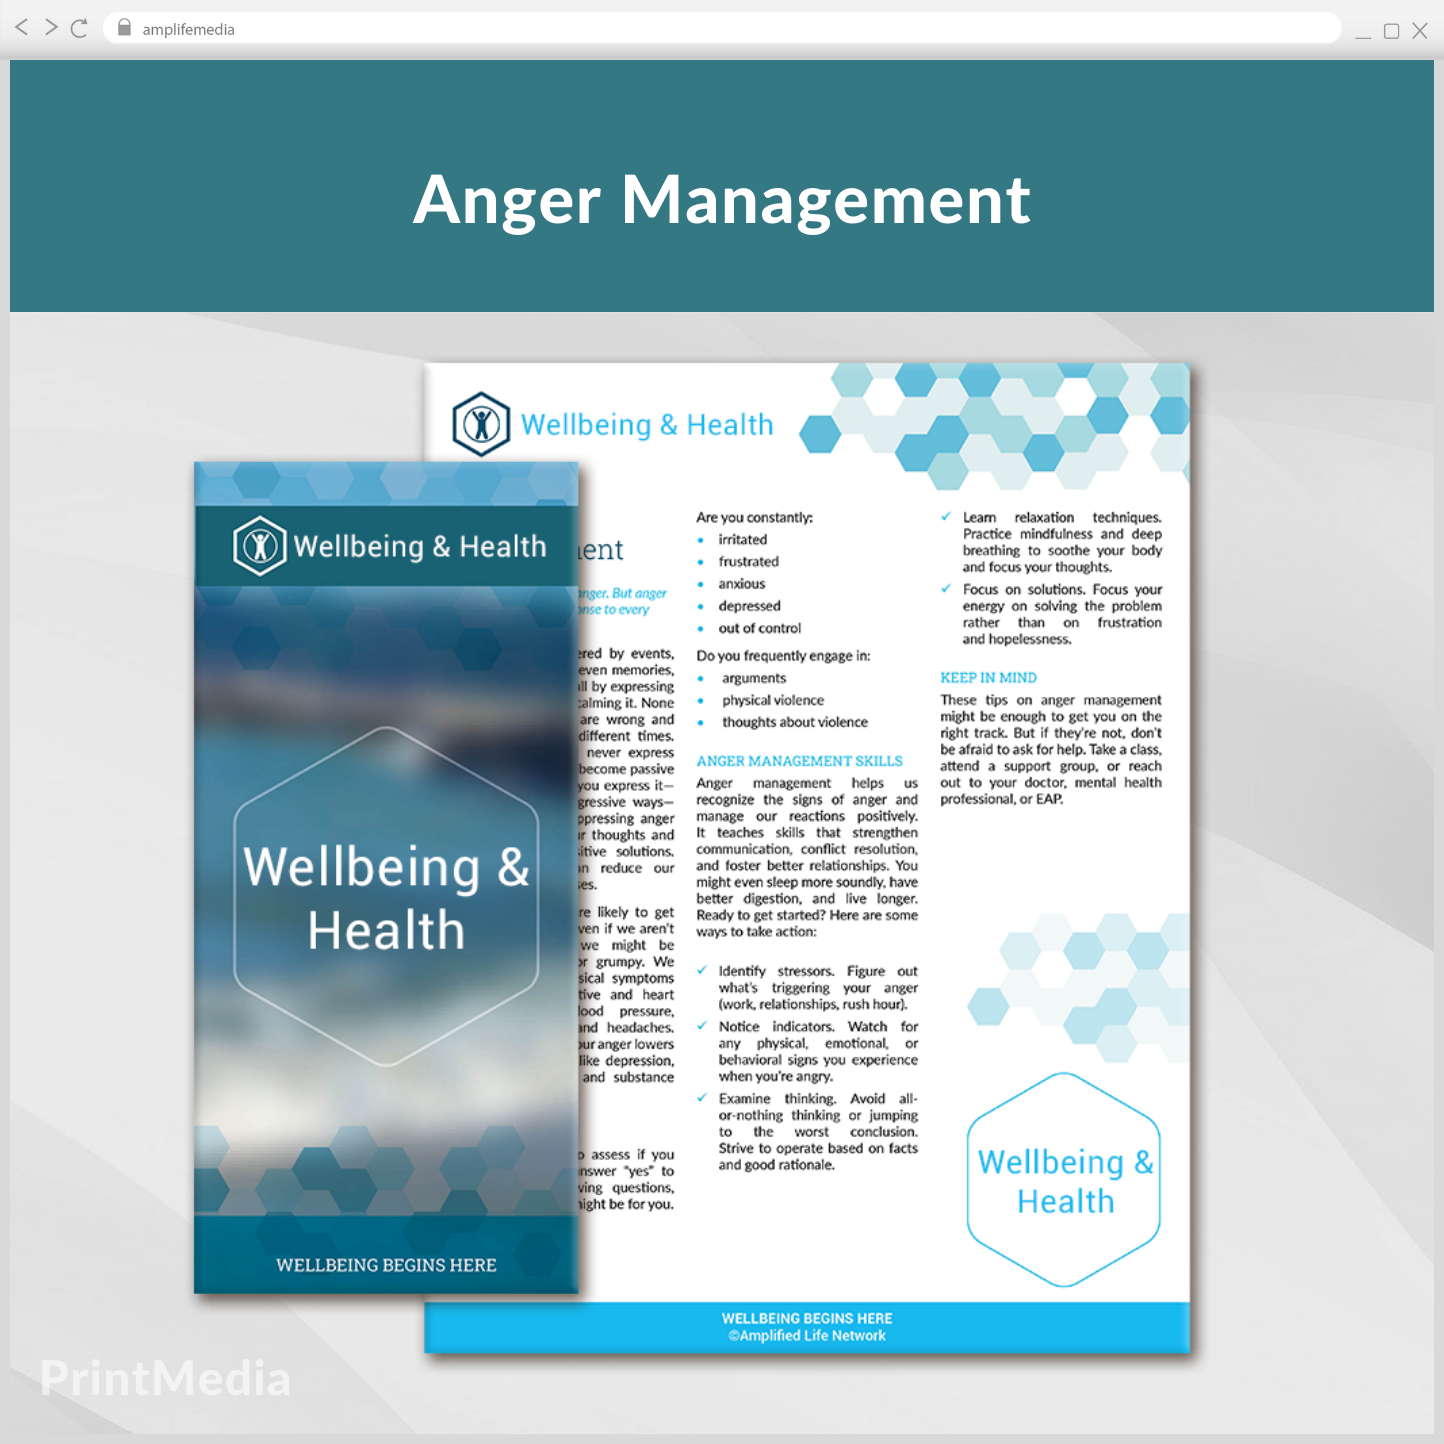 Subscription to Wellbeing Media: Anger Management PrintMedia 622